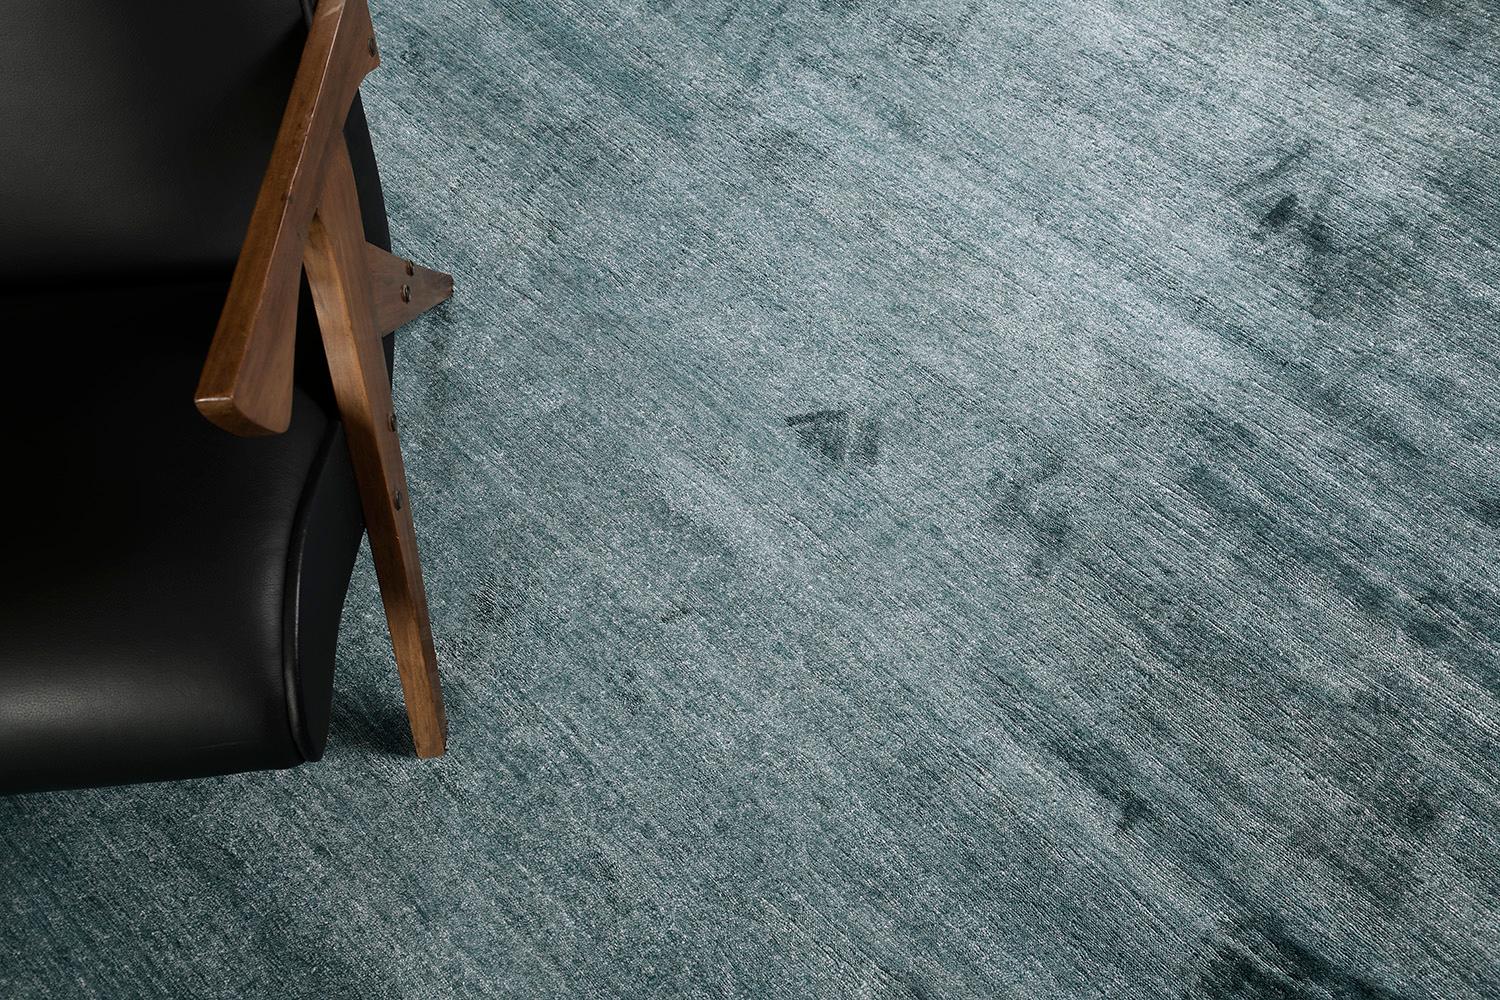 Dara' is a most sought after rug in Elan Collection in the mesmerizing shade of pine green. Its simplicity does not take away from the rug's luxurious quality and beautiful sheen made of bamboo silk. Dara is a fabulous rug for any design